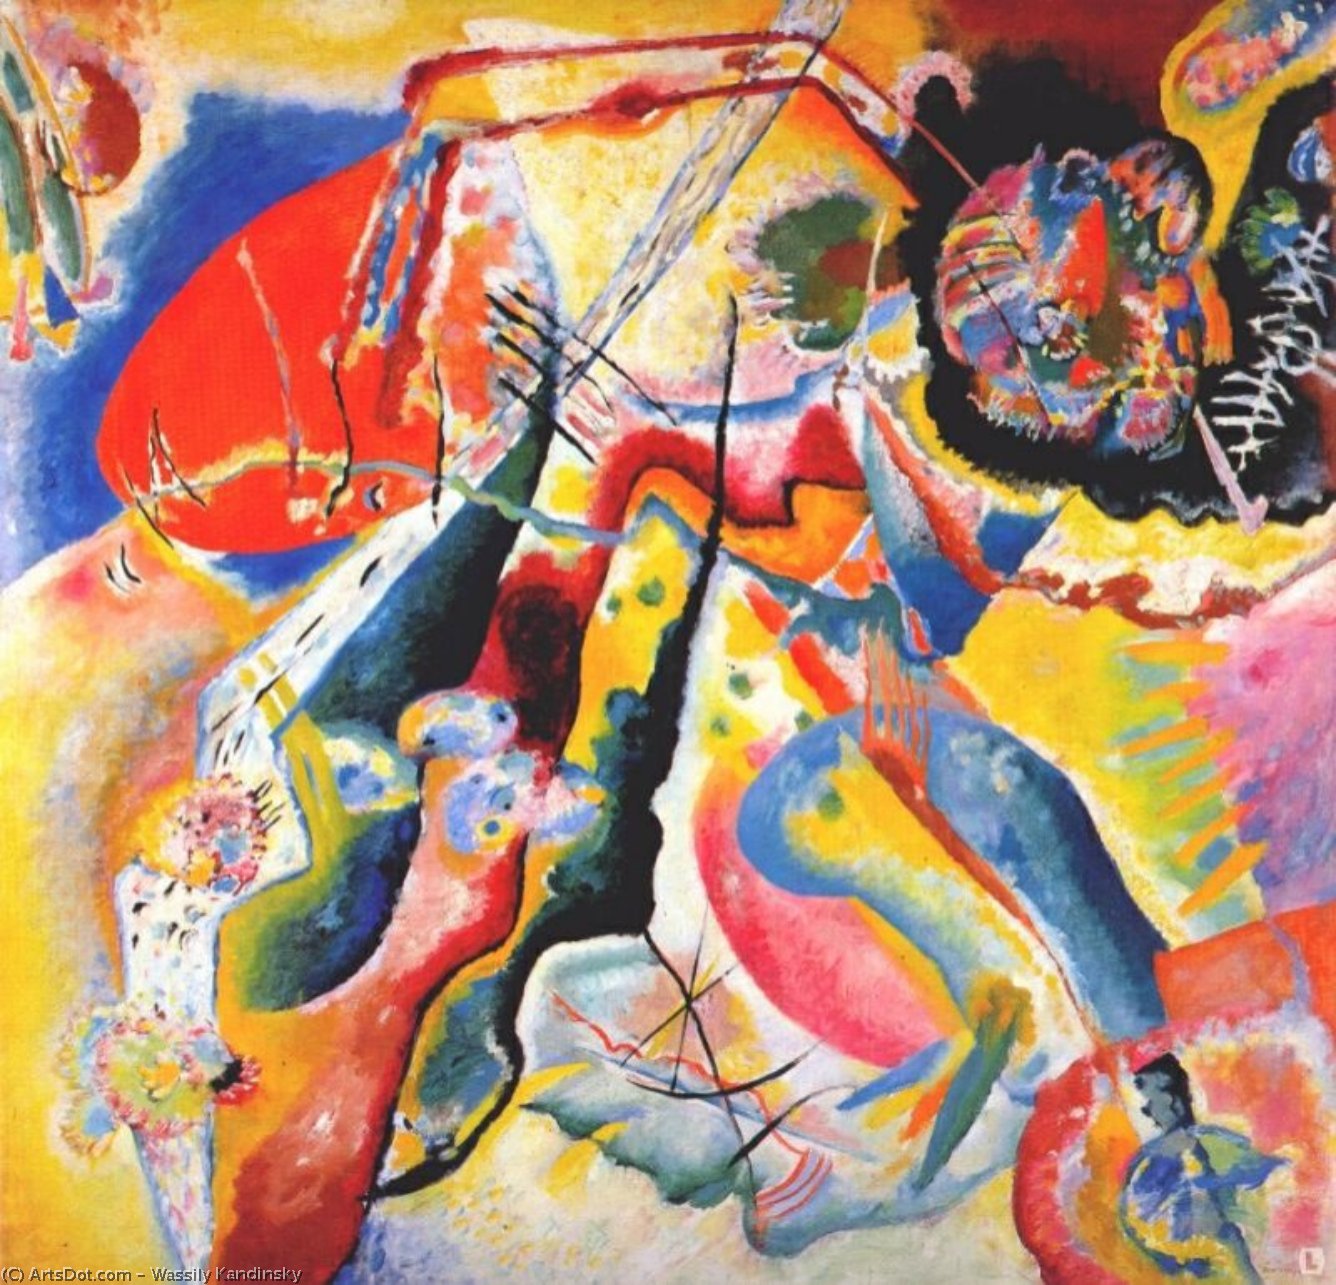 WikiOO.org - Encyclopedia of Fine Arts - Maalaus, taideteos Wassily Kandinsky - Painting with red spot